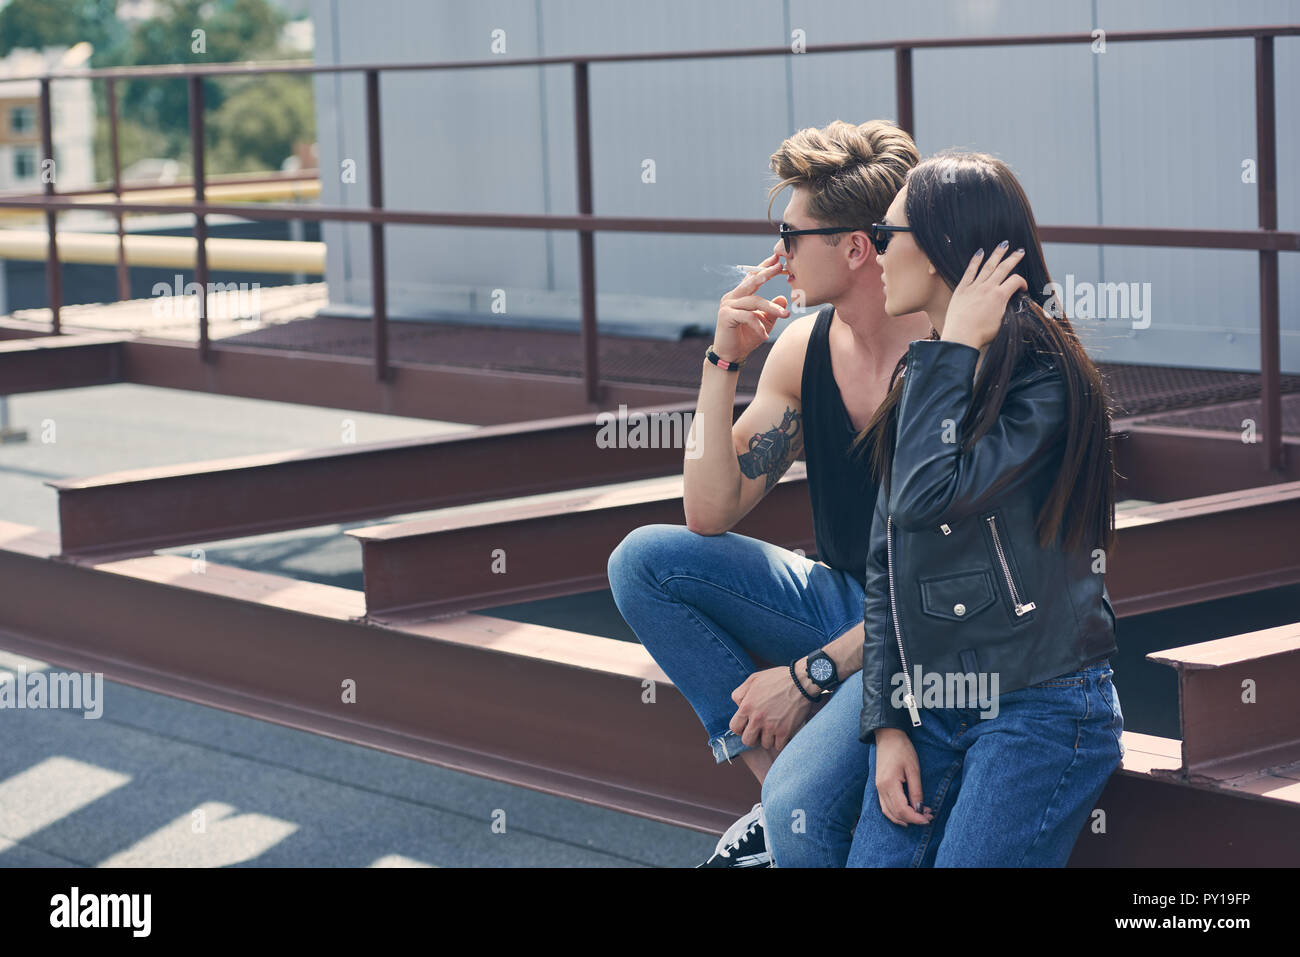 young handsome man smoking cigarette near his girlfriend Stock Photo